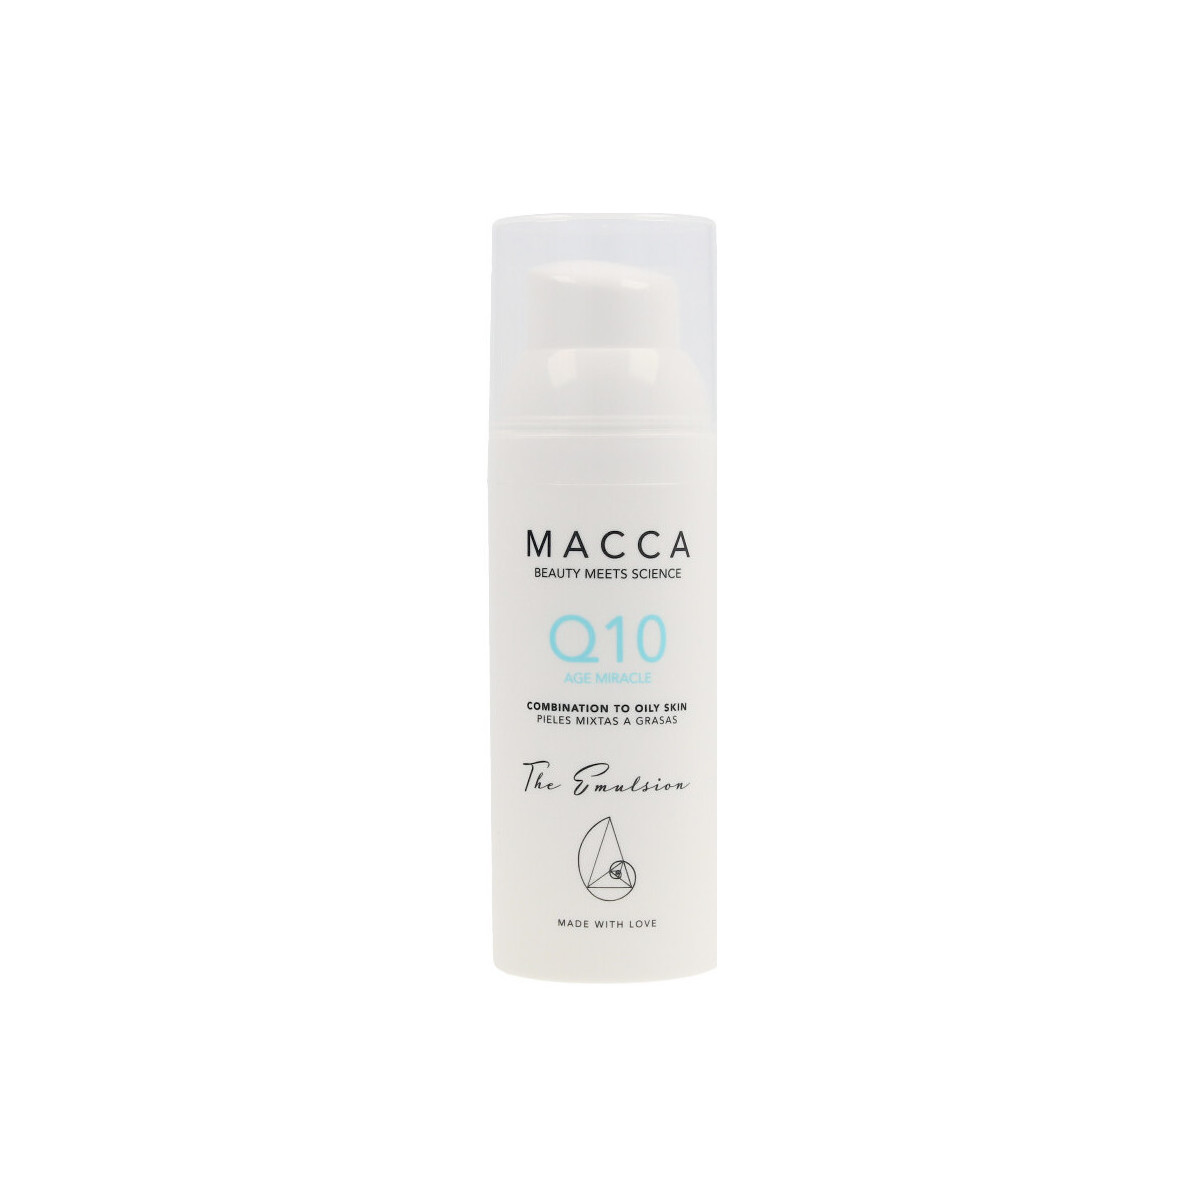 Beauty Anti-Aging & Anti-Falten Produkte Macca Q10 Age Miracle Emulsion Combination To Oily Skin 